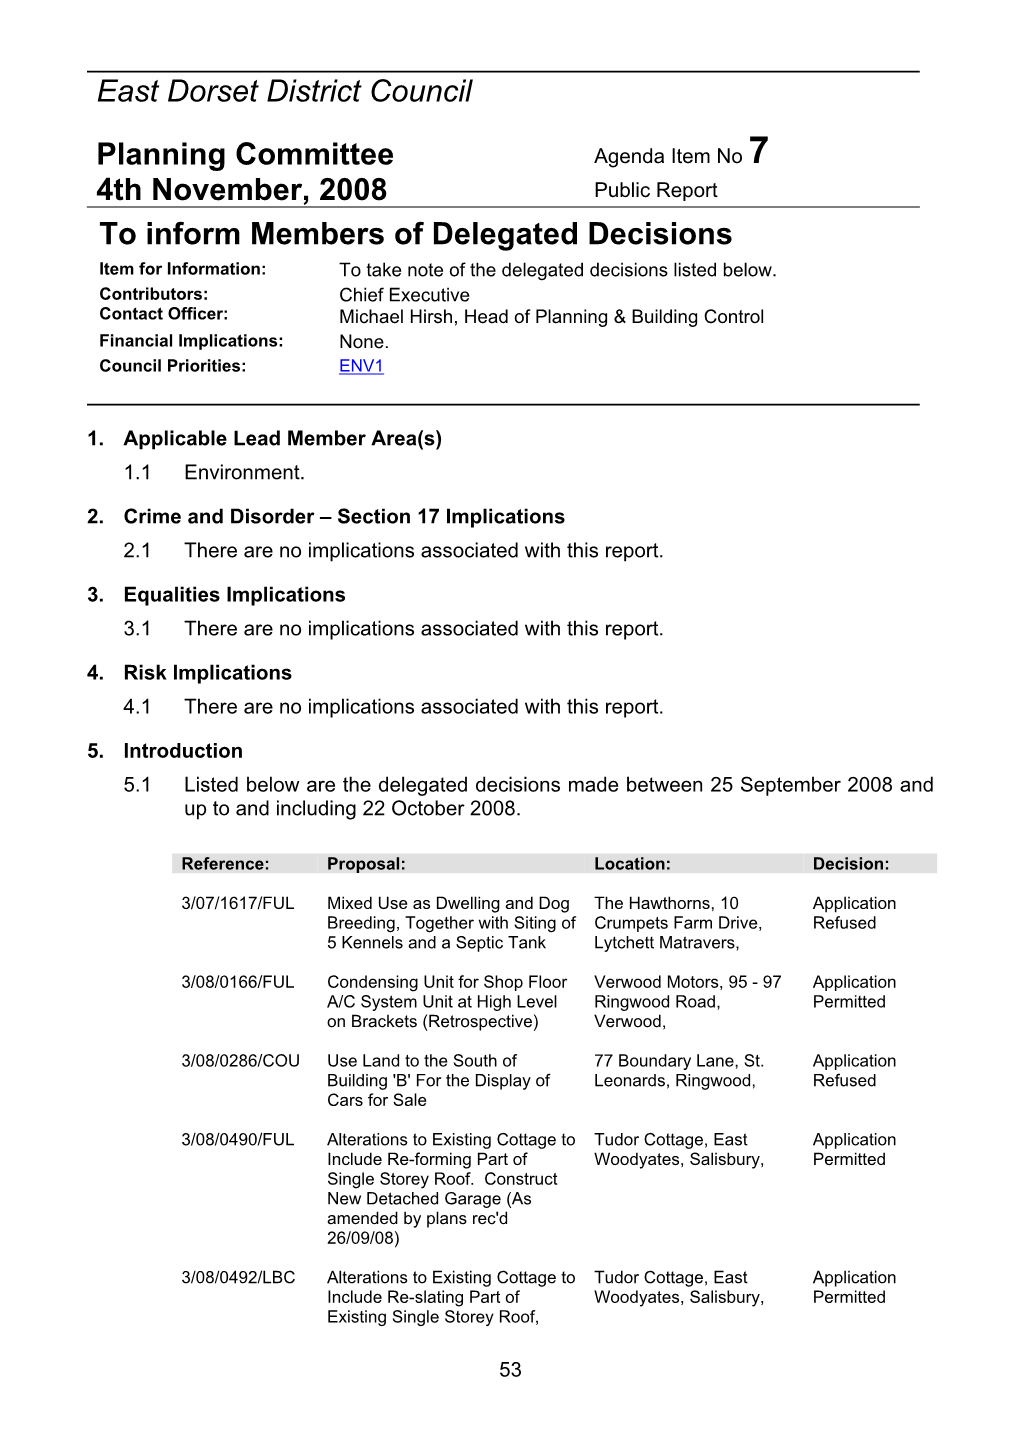 To Inform Members of Delegated Decisions Item for Information: to Take Note of the Delegated Decisions Listed Below